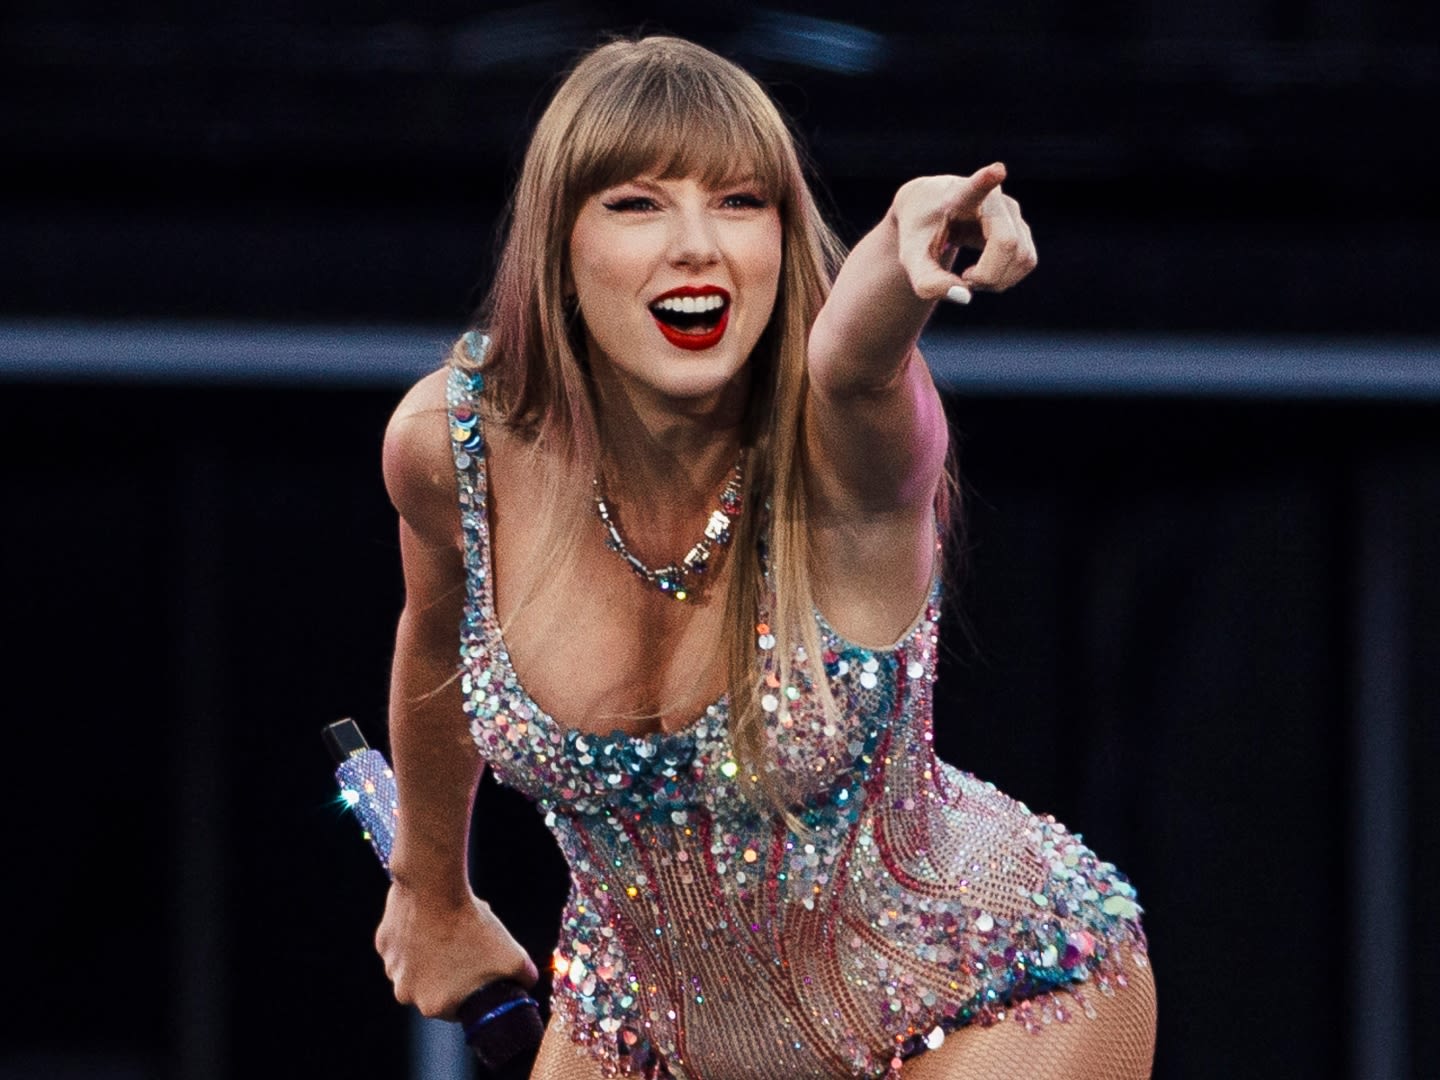 Sources Allege Taylor Swift Has This A-Lister in Mind to Be Her Maid of Honor One Day